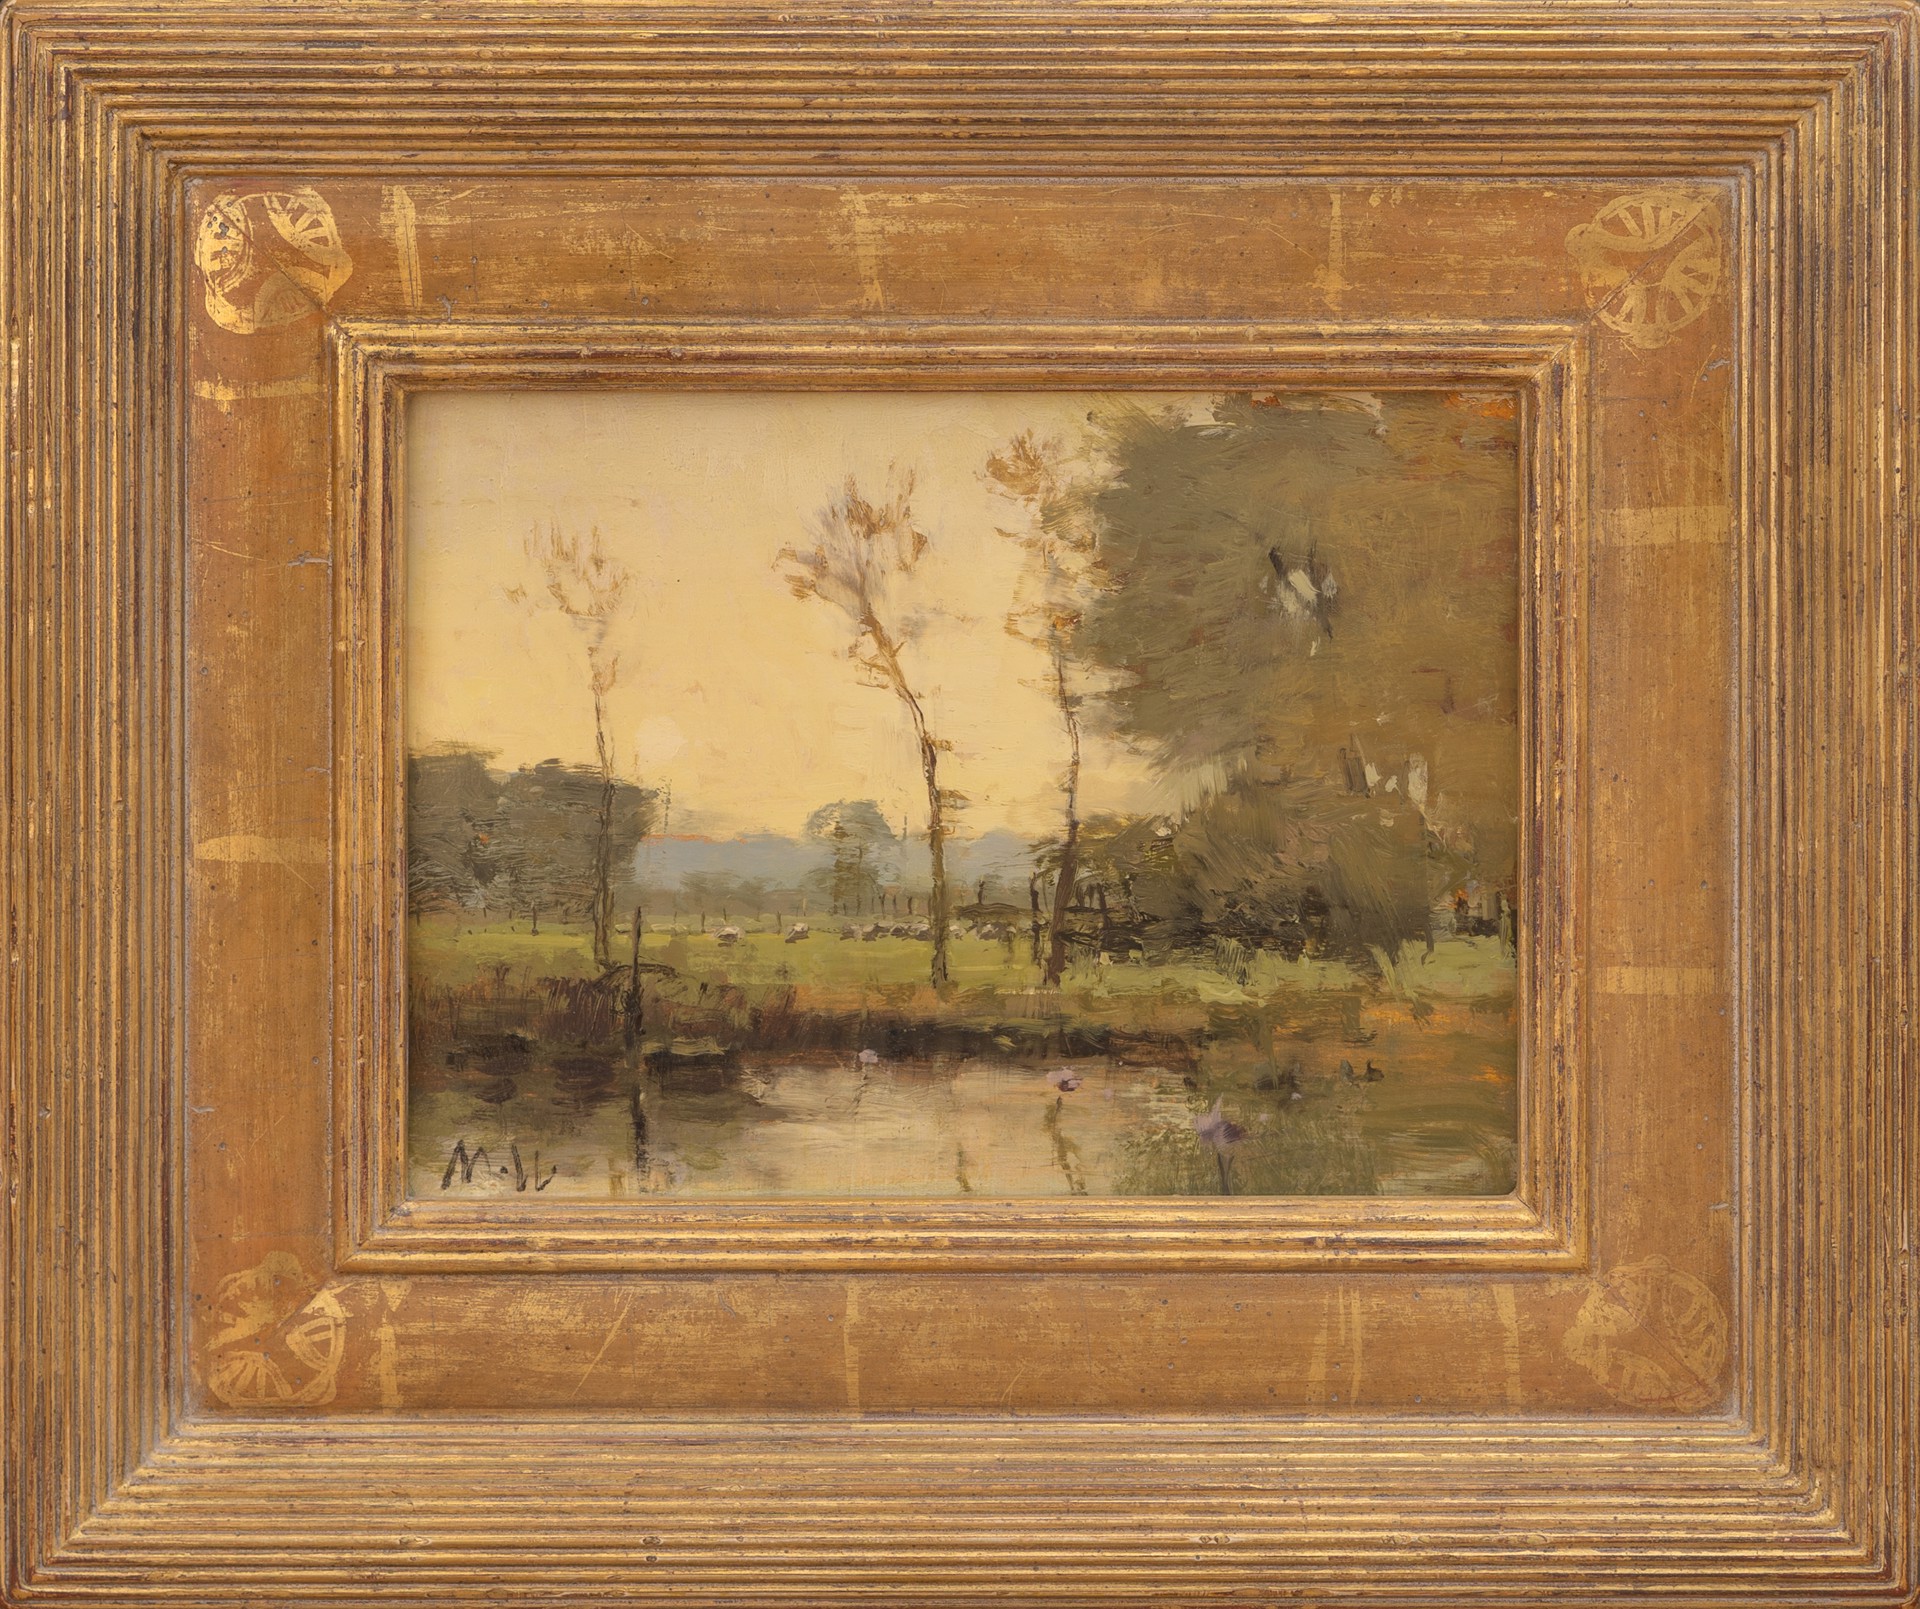 Tribute to George Inness by Michael Workman